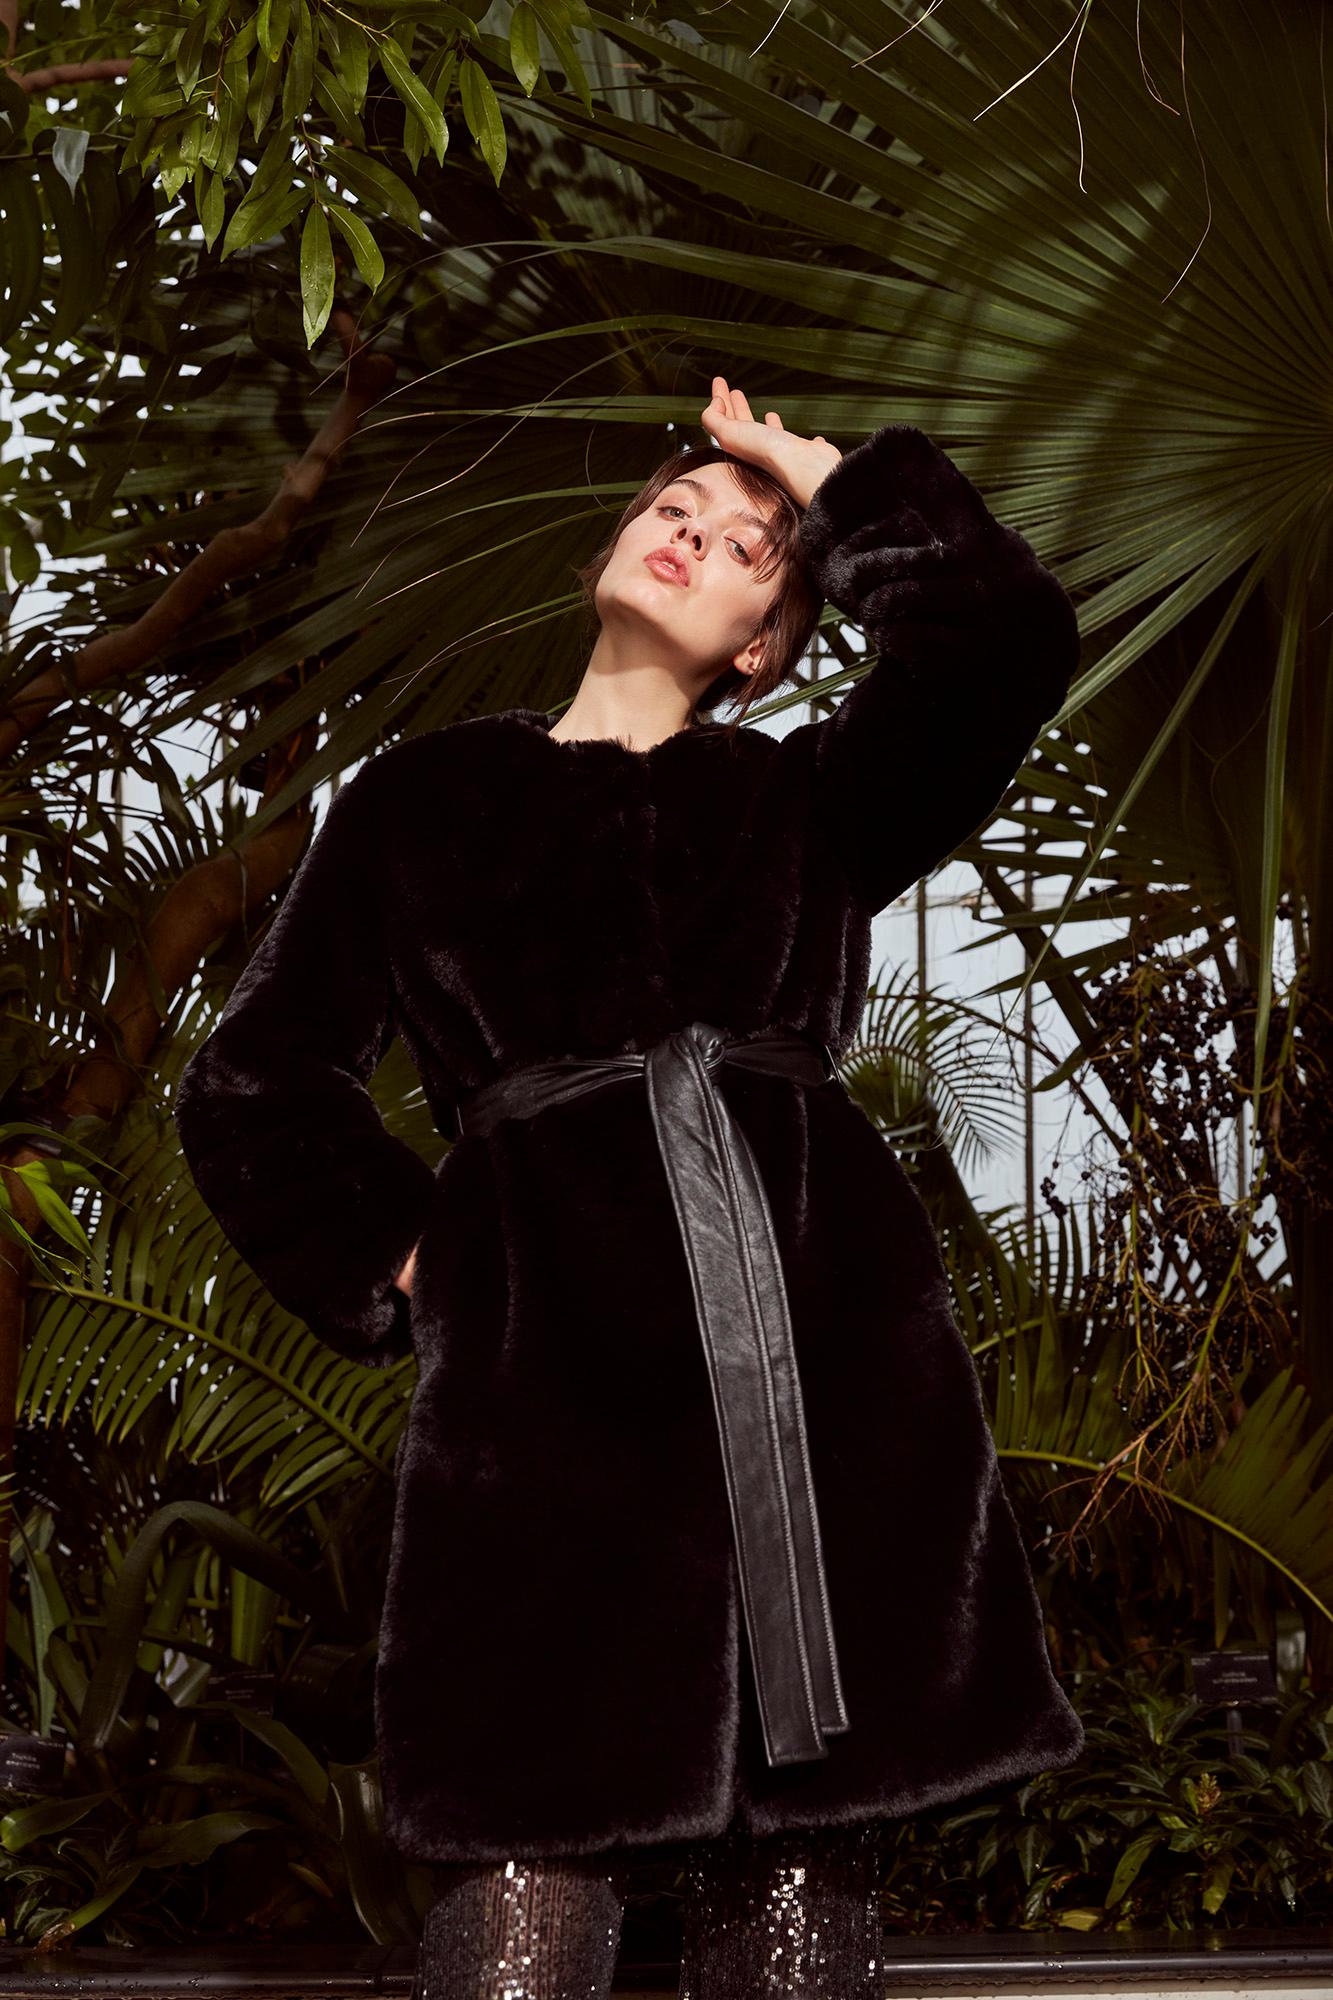 Verheyen London Serena  Collarless Faux Fur Coat in Black - Size uk 10

Handmade in London, made with the highest quality faux fur on the market - you wouldnt even know it was fake, its that good. This luxury item is an investment piece to wear for